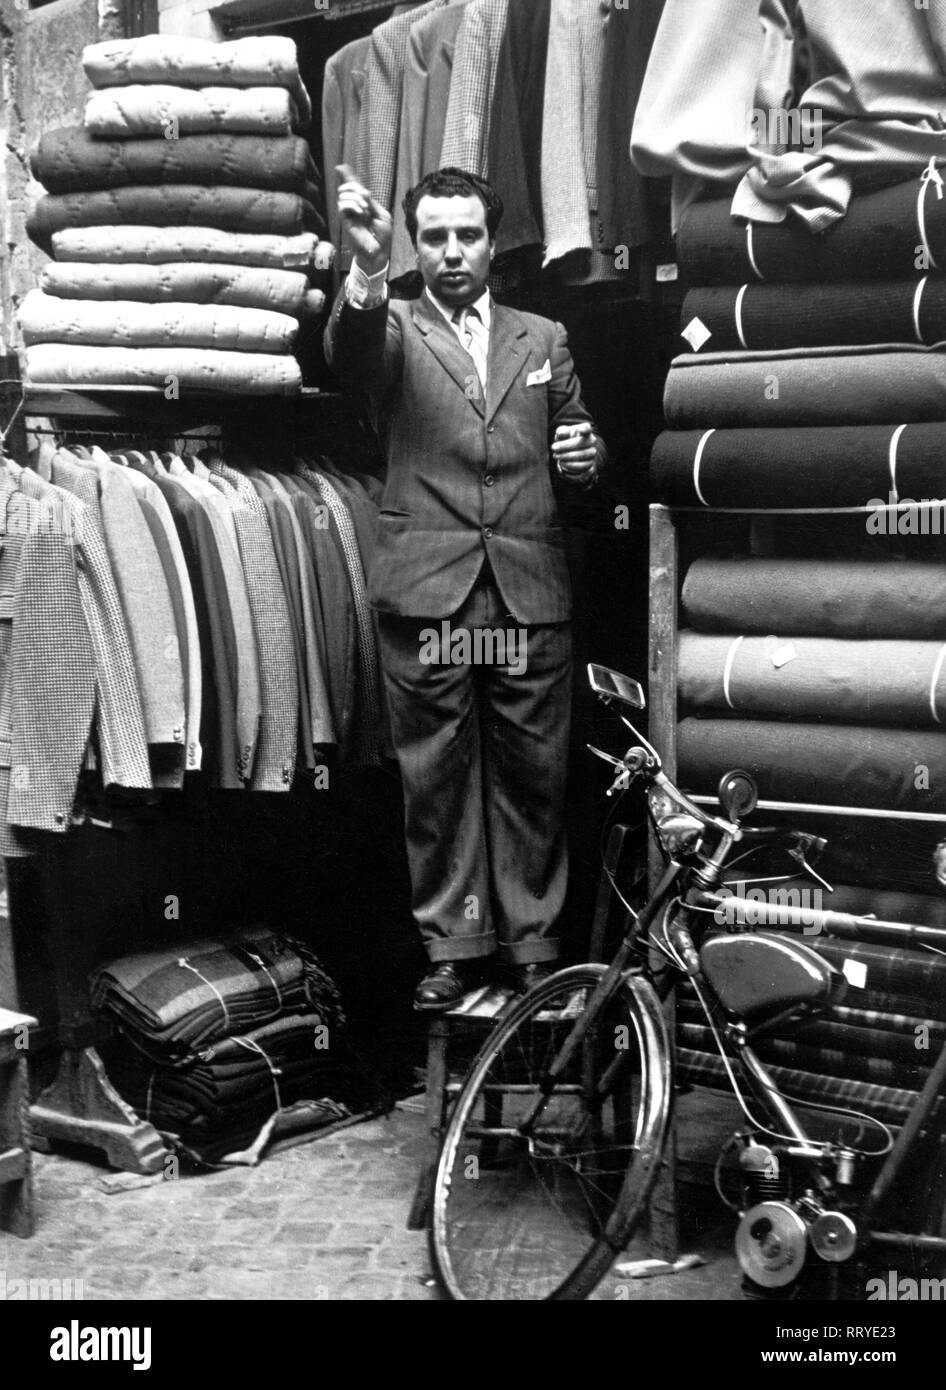 Travel to Rome - Italy in 1950s - vendor in a clothes store in Rome. Verkäufer für Herrenmode in Rom, Italien. Image date 1954. Photo Erich Andres Stock Photo